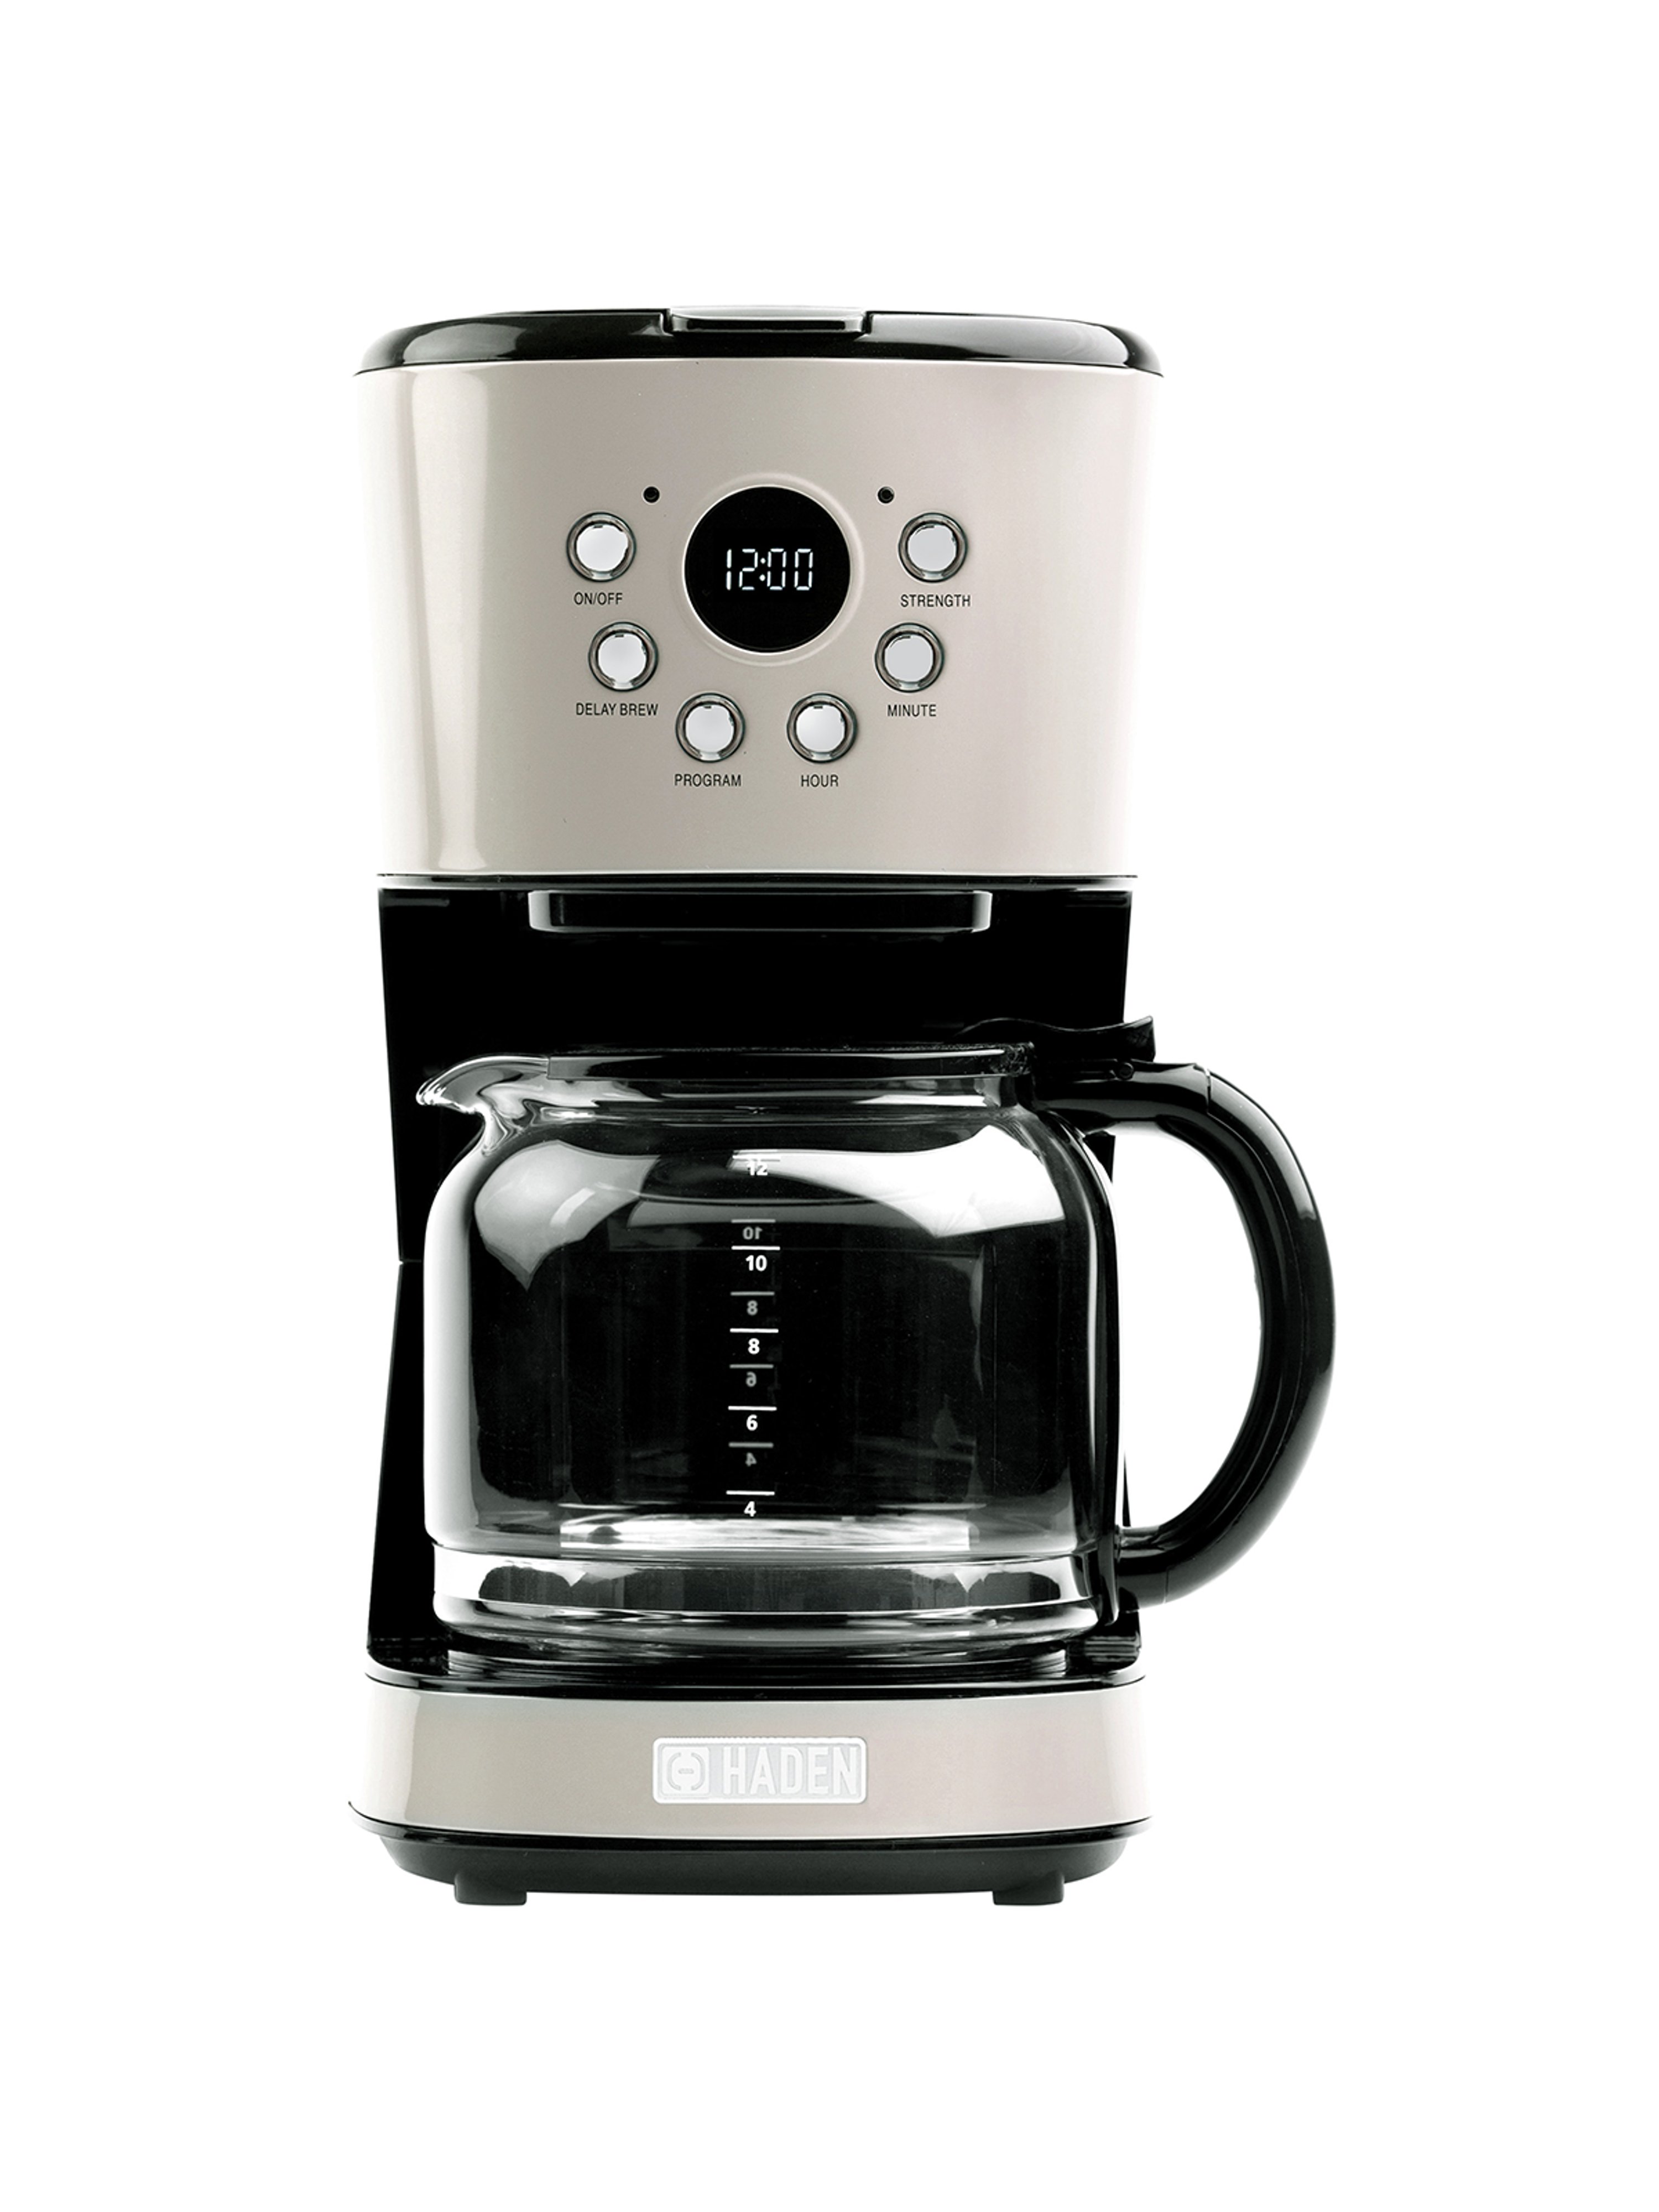 HADEN HADEN 12-CUP PROGRAMMABLE COFFEE MAKER WITH STRENGTH CONTROL